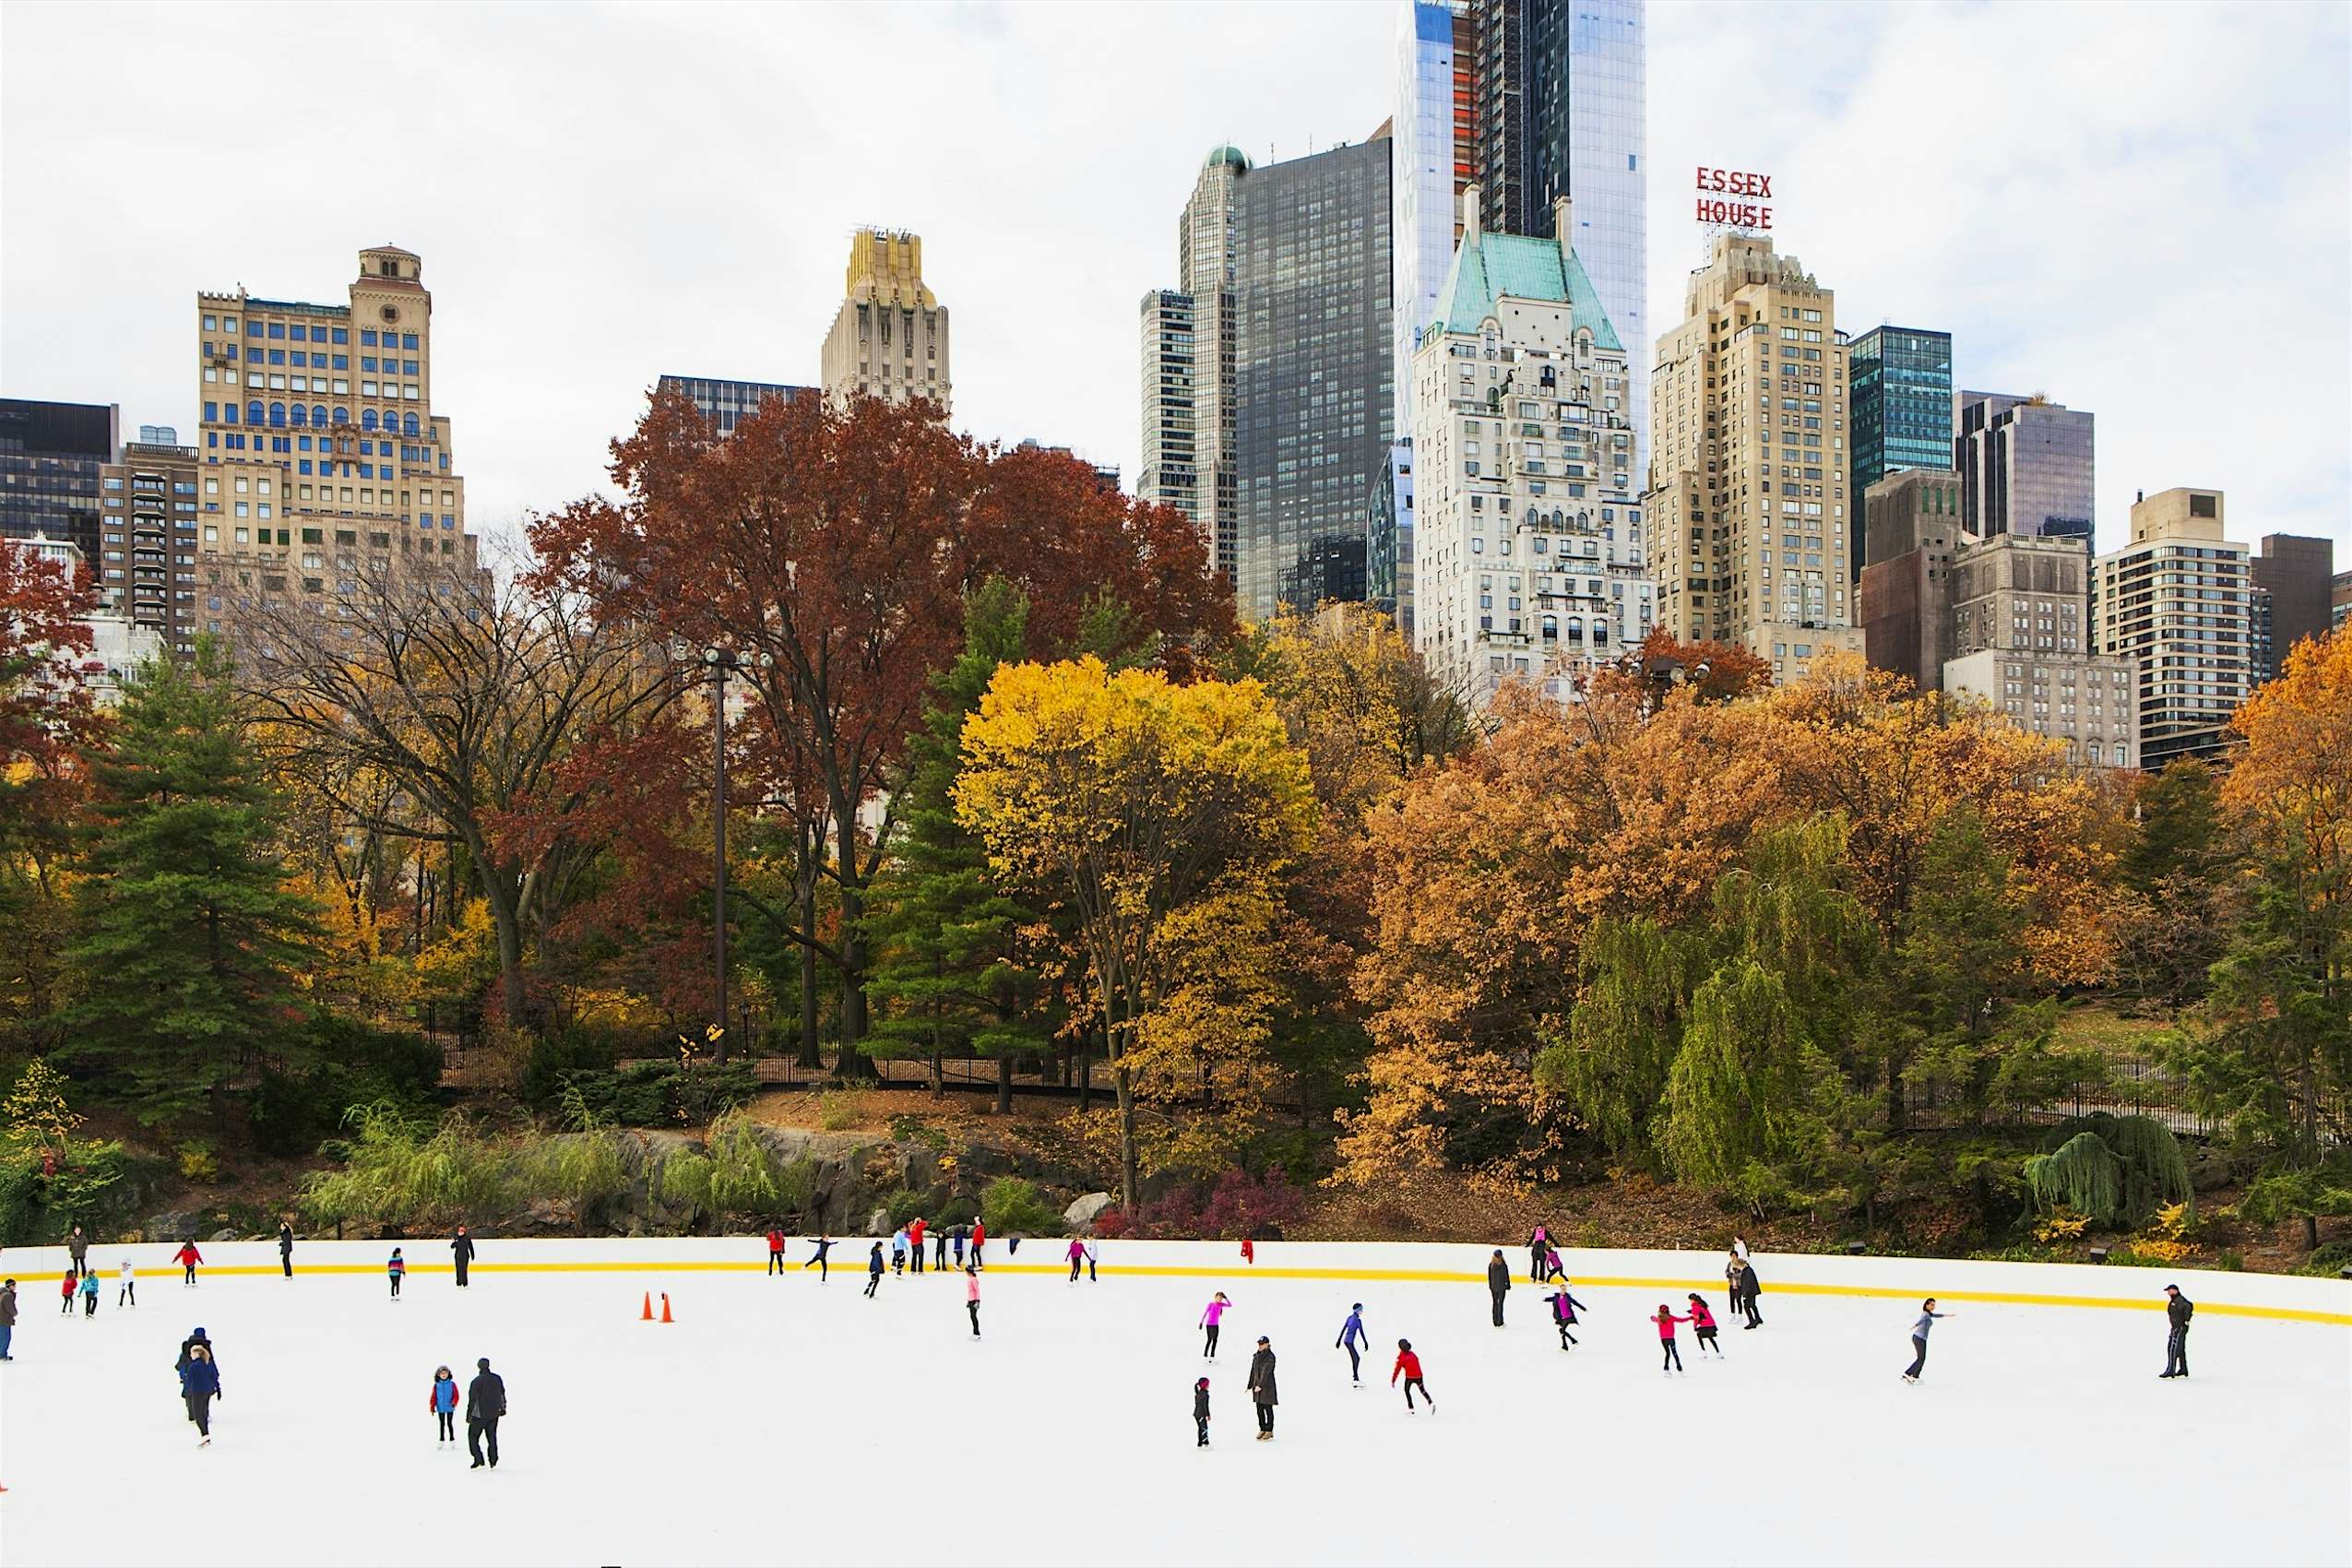 new york tourism in winter